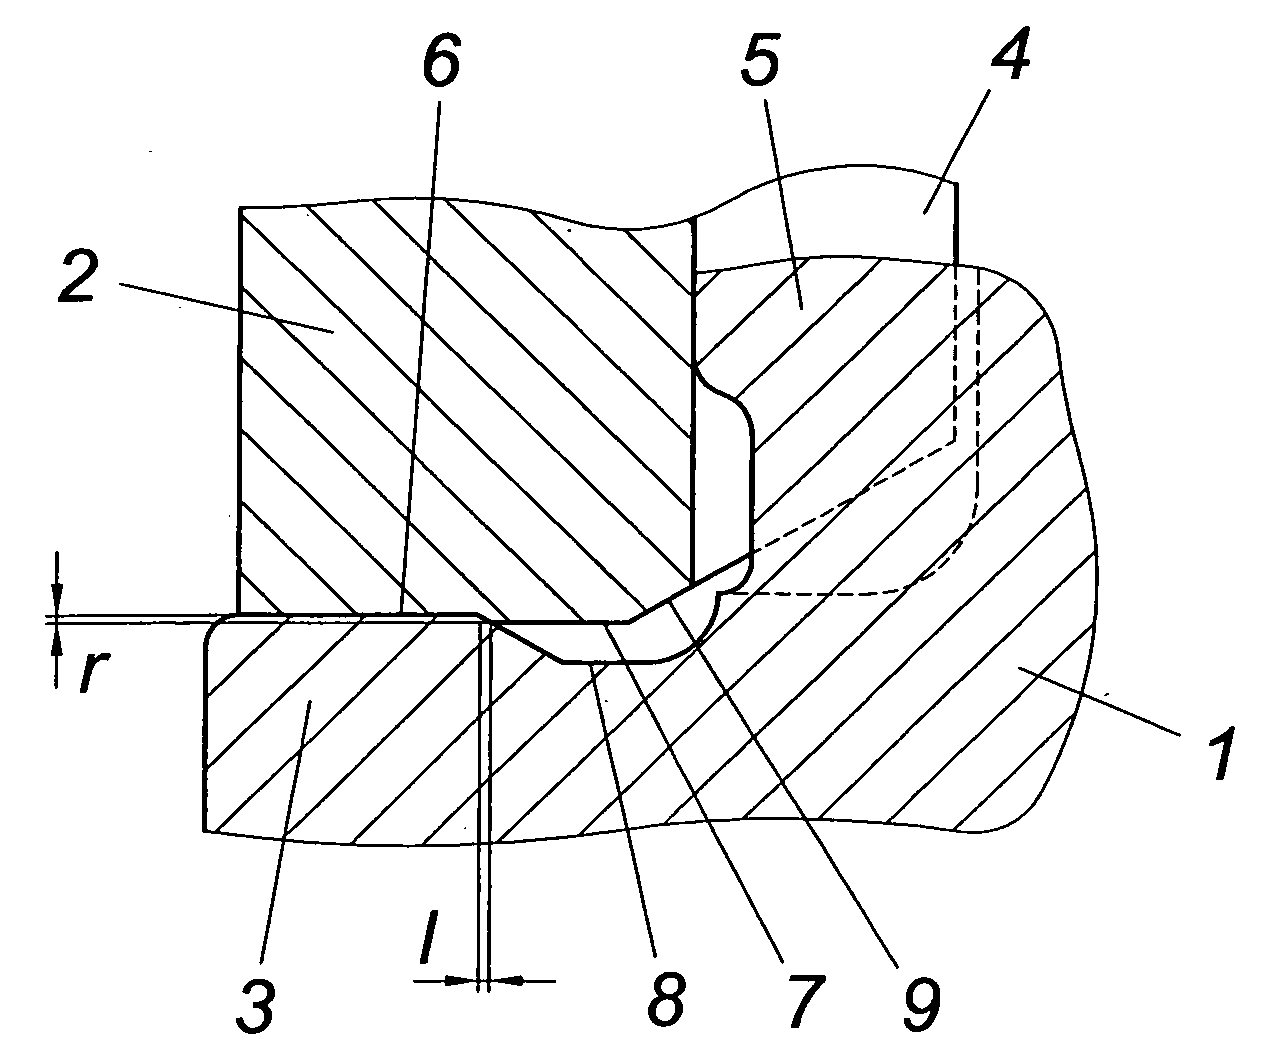 Metallic structural part joined from at least two components